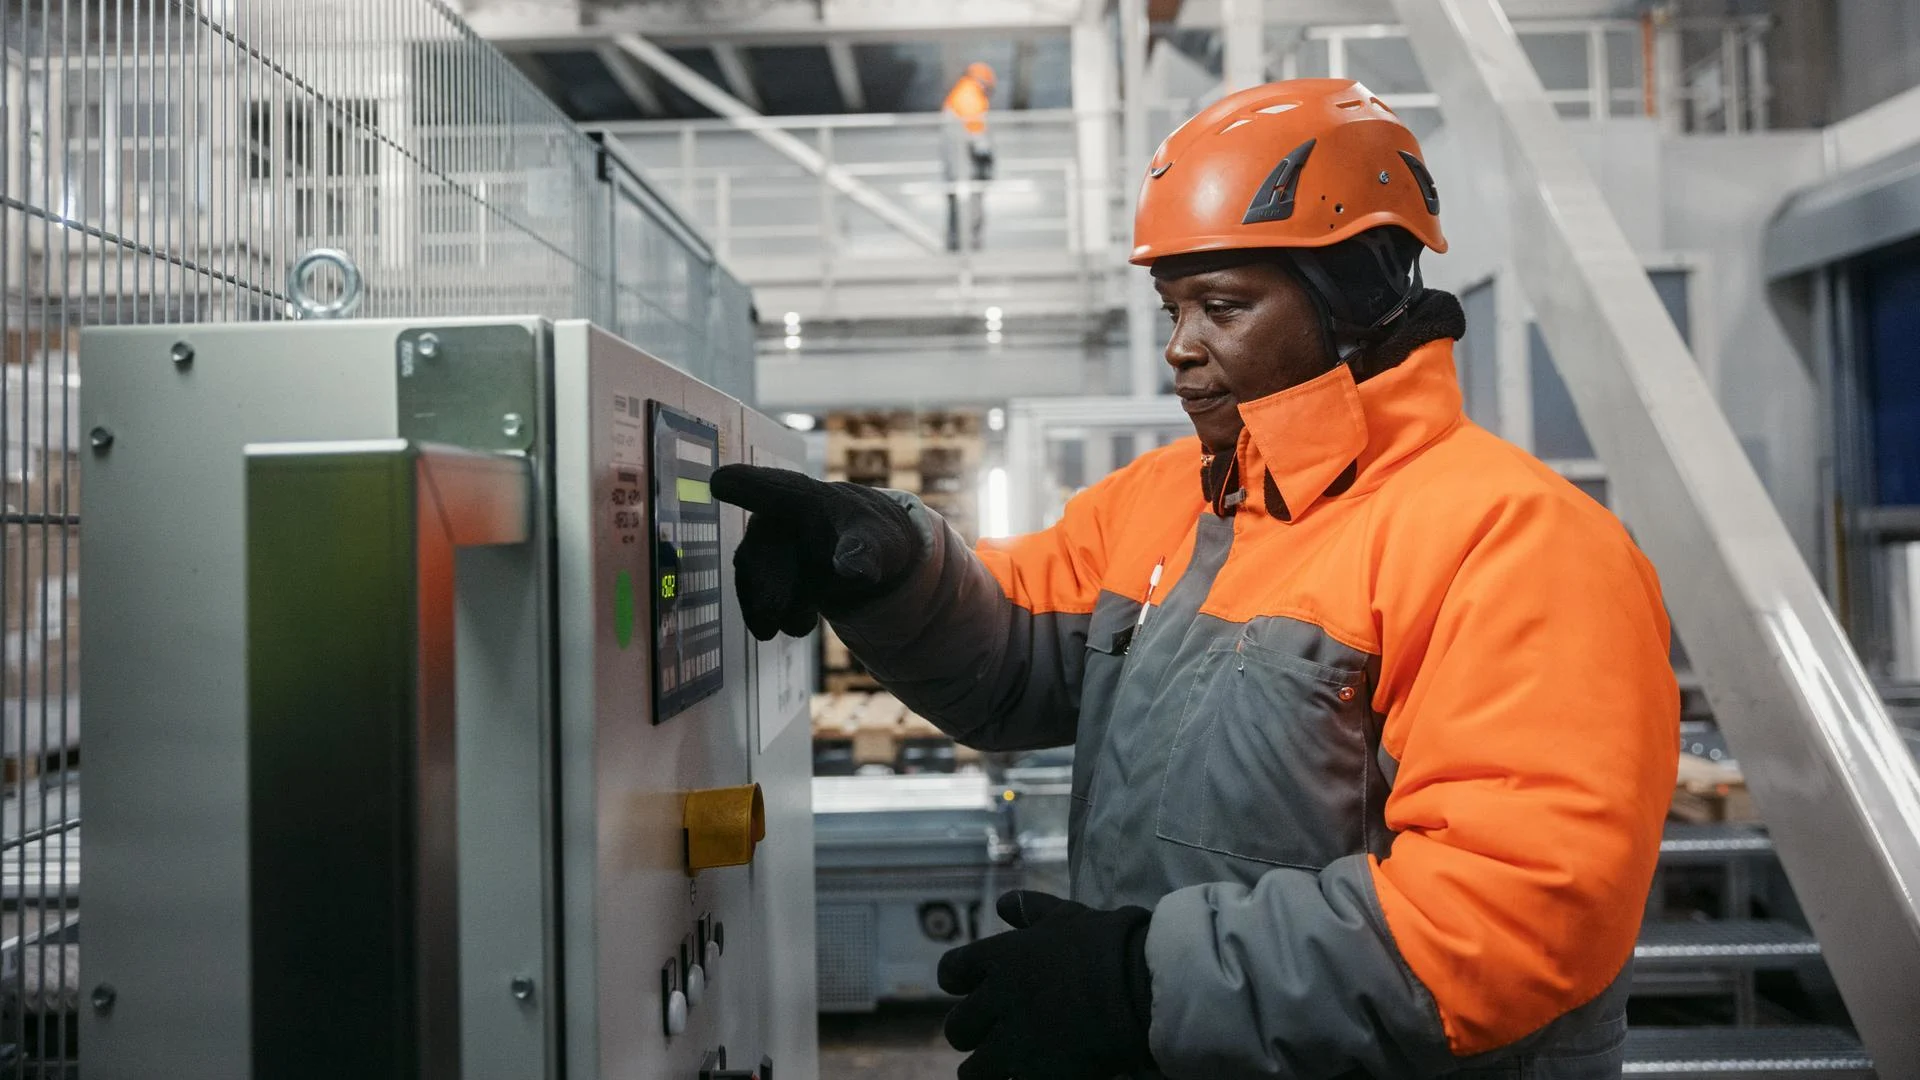 Employee in protective clothing operates a machine